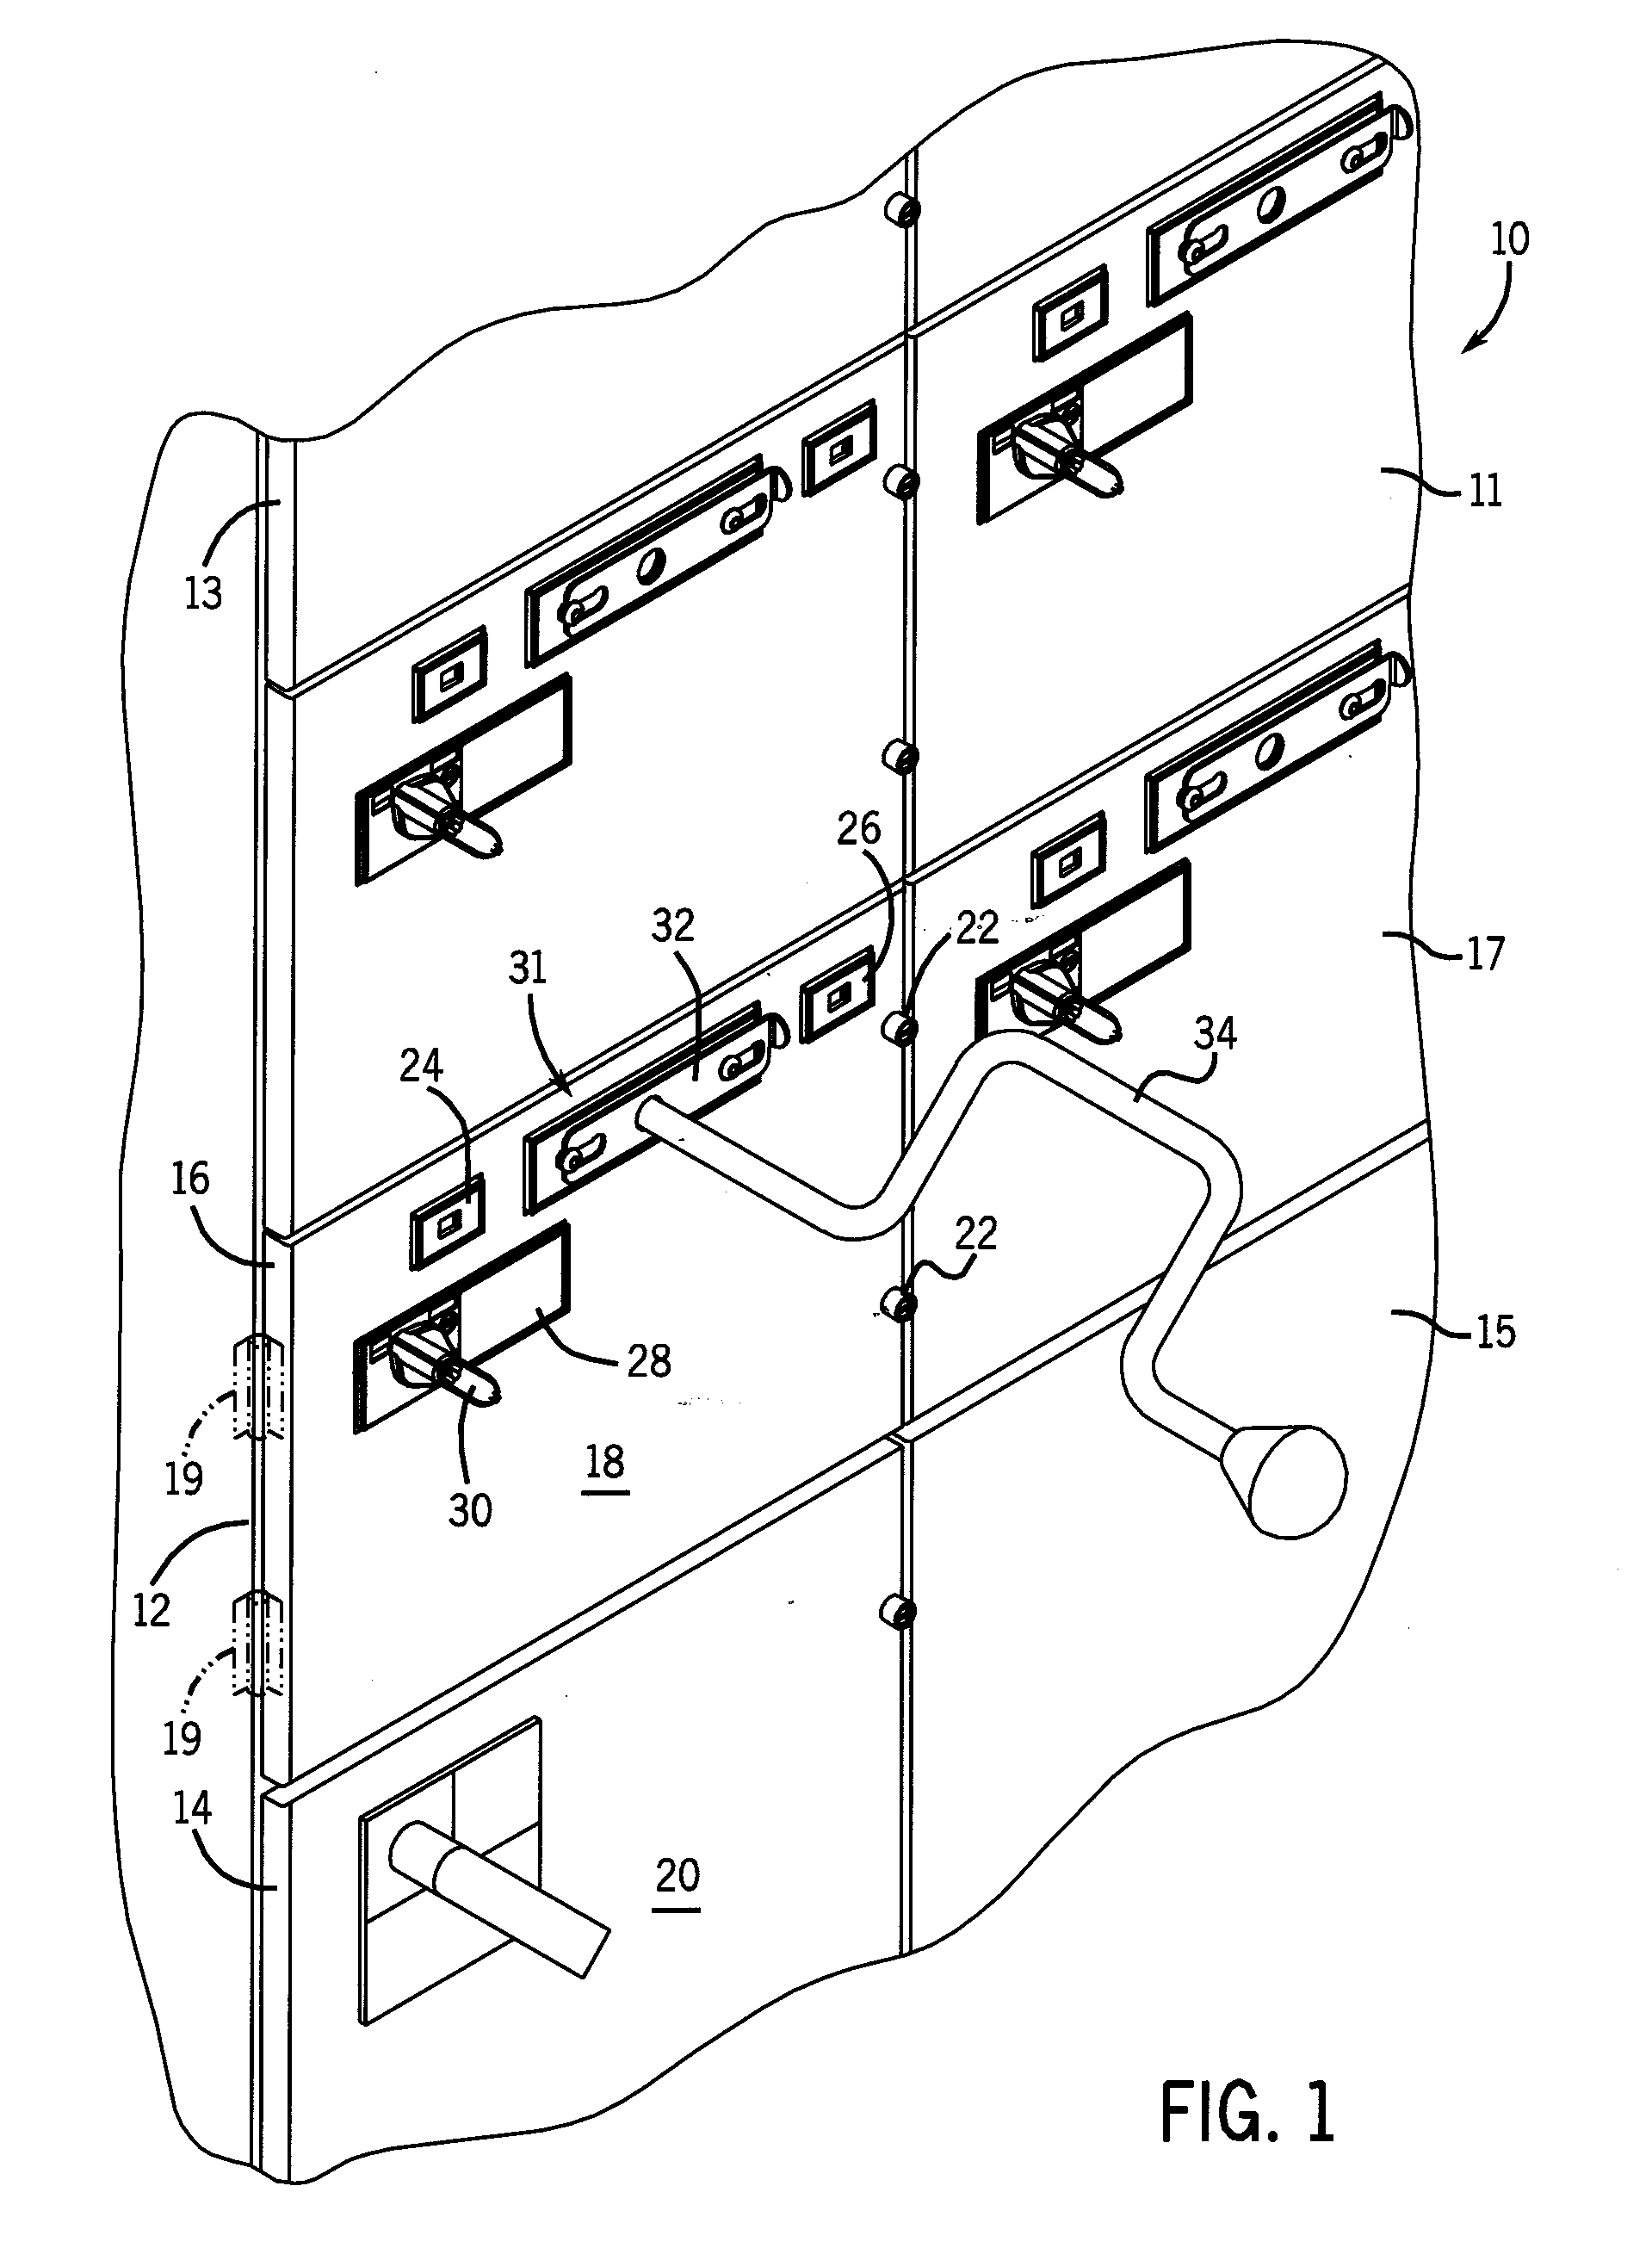 Free-wheeling clutch for a motor control center subunit having moveable line contacts